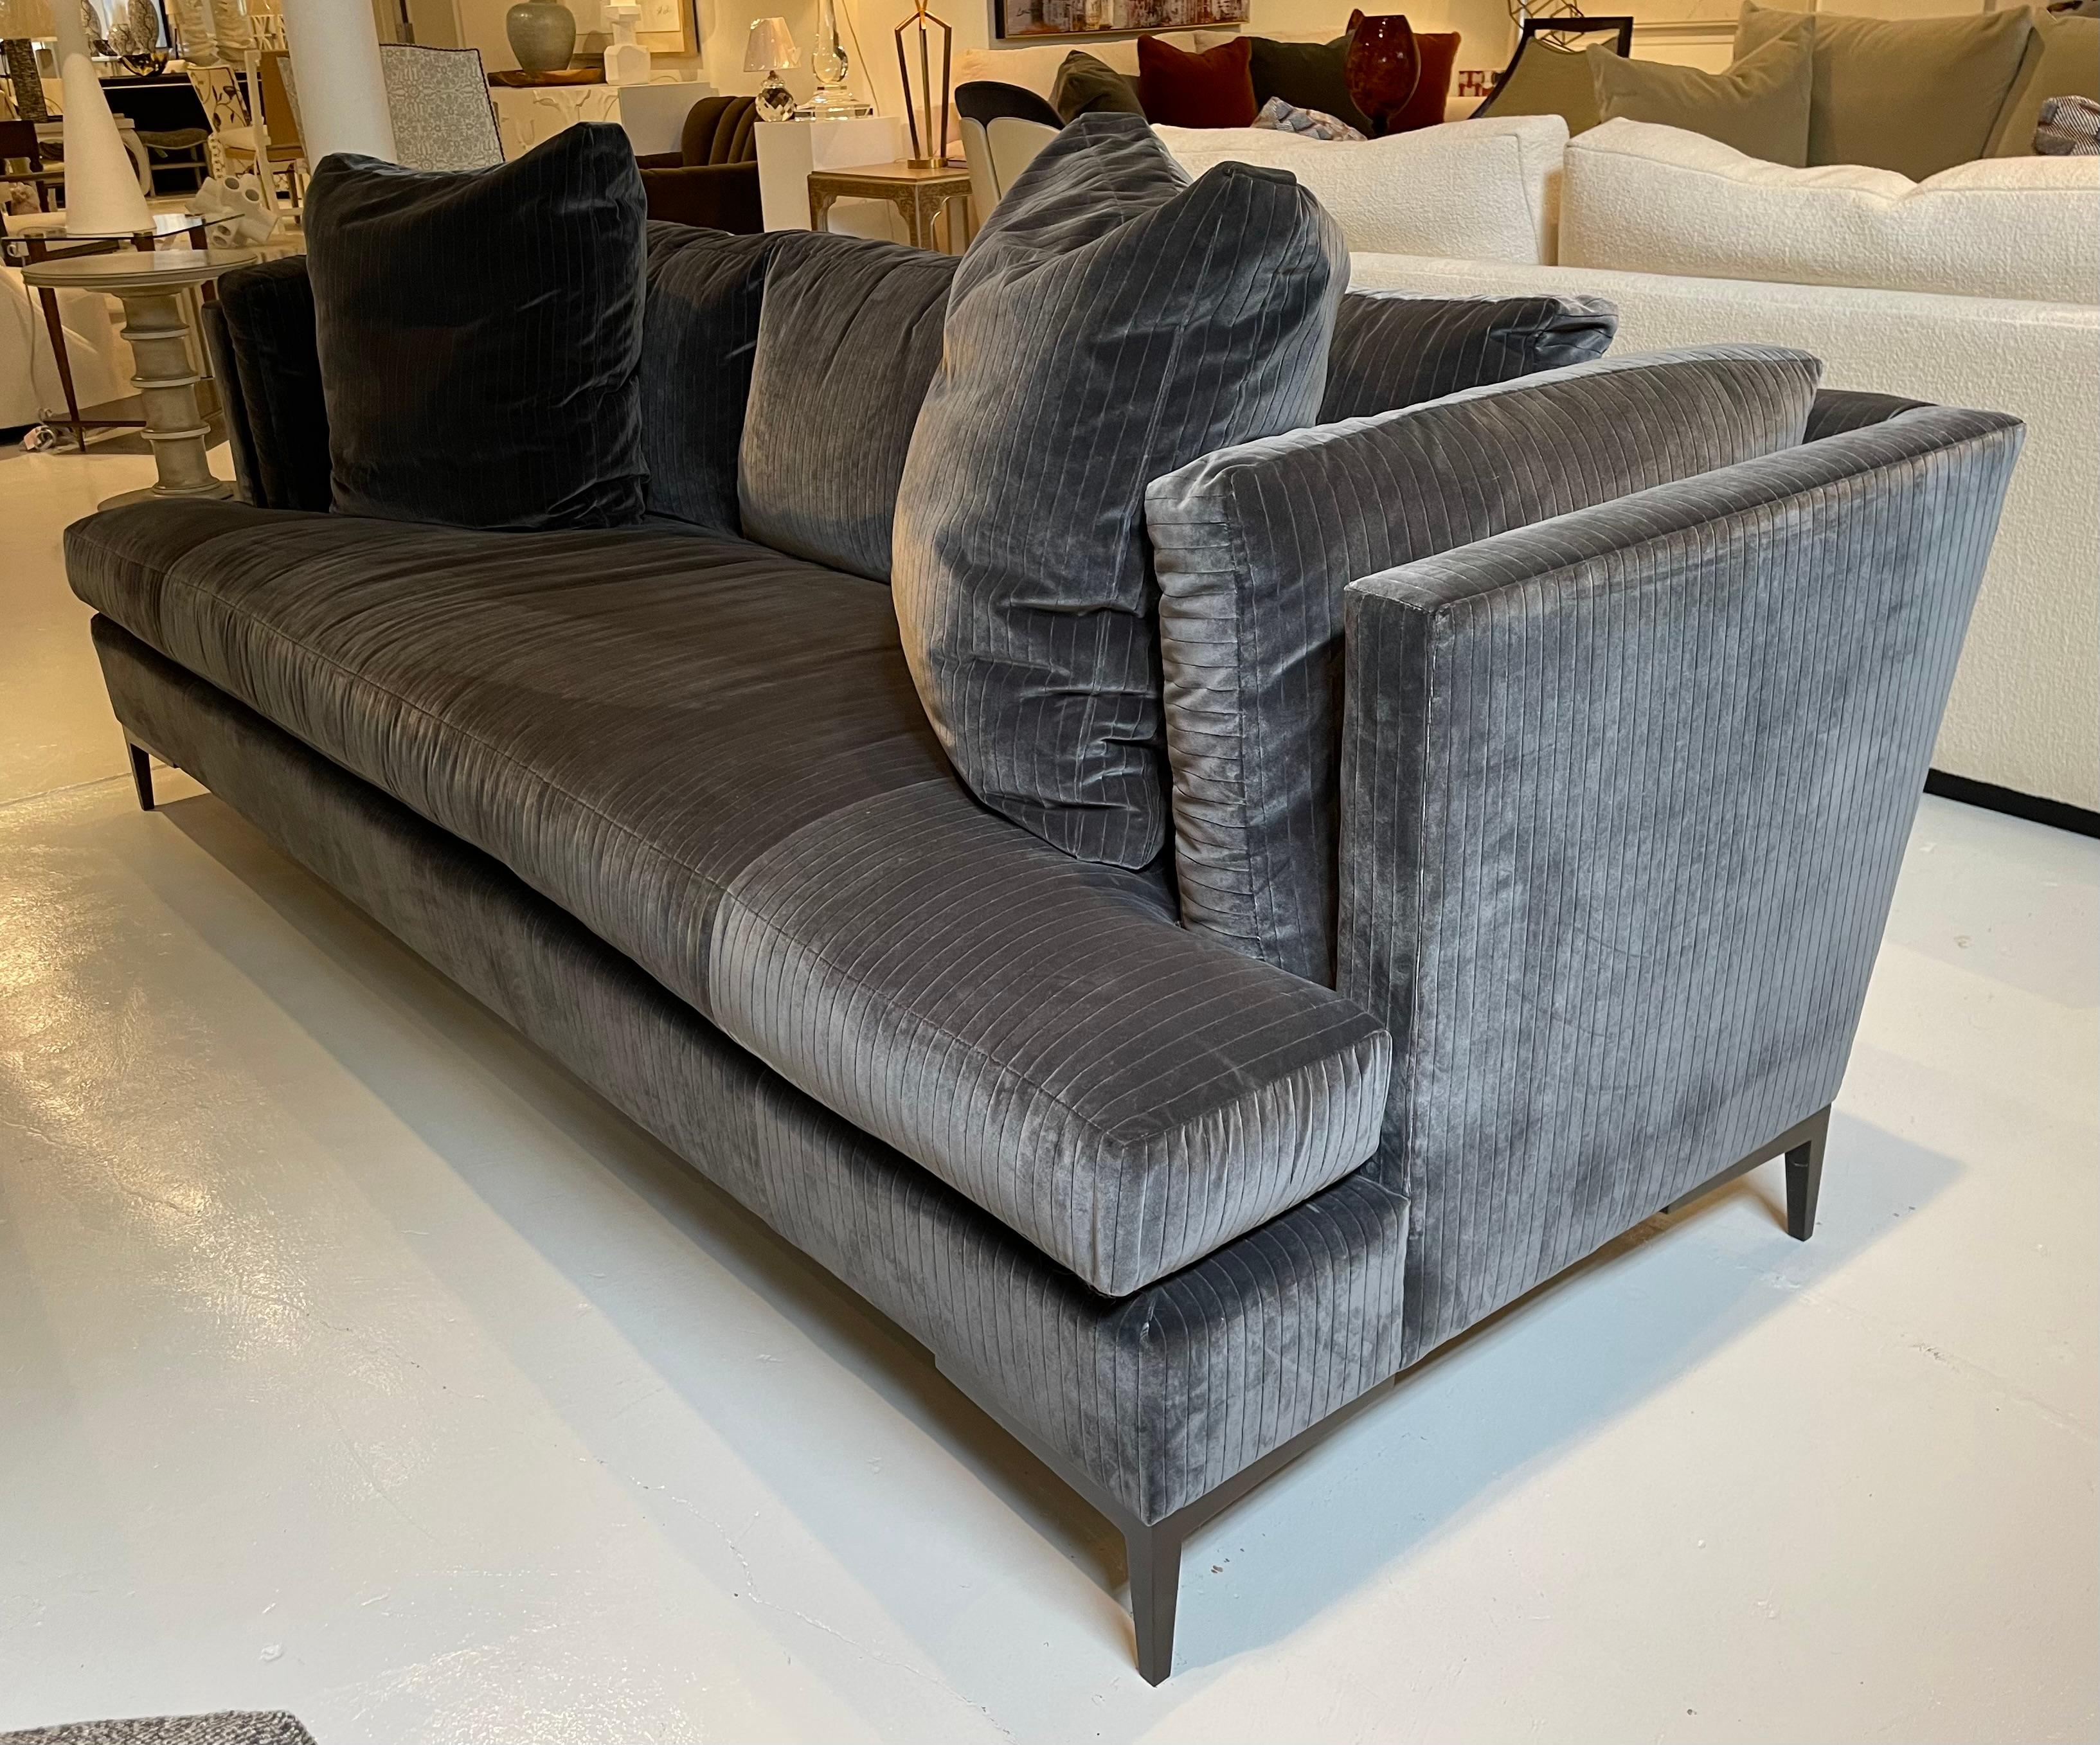 Showroom New.  Theodore Alexander's Most Popular Sofa.  The Aiden is covered in a beautiful rich gray velvet with a subtle stripe detail.  Modern metal Legs are finished in Antique Bronze.  The Aiden has a clean design with a bench seat and 2